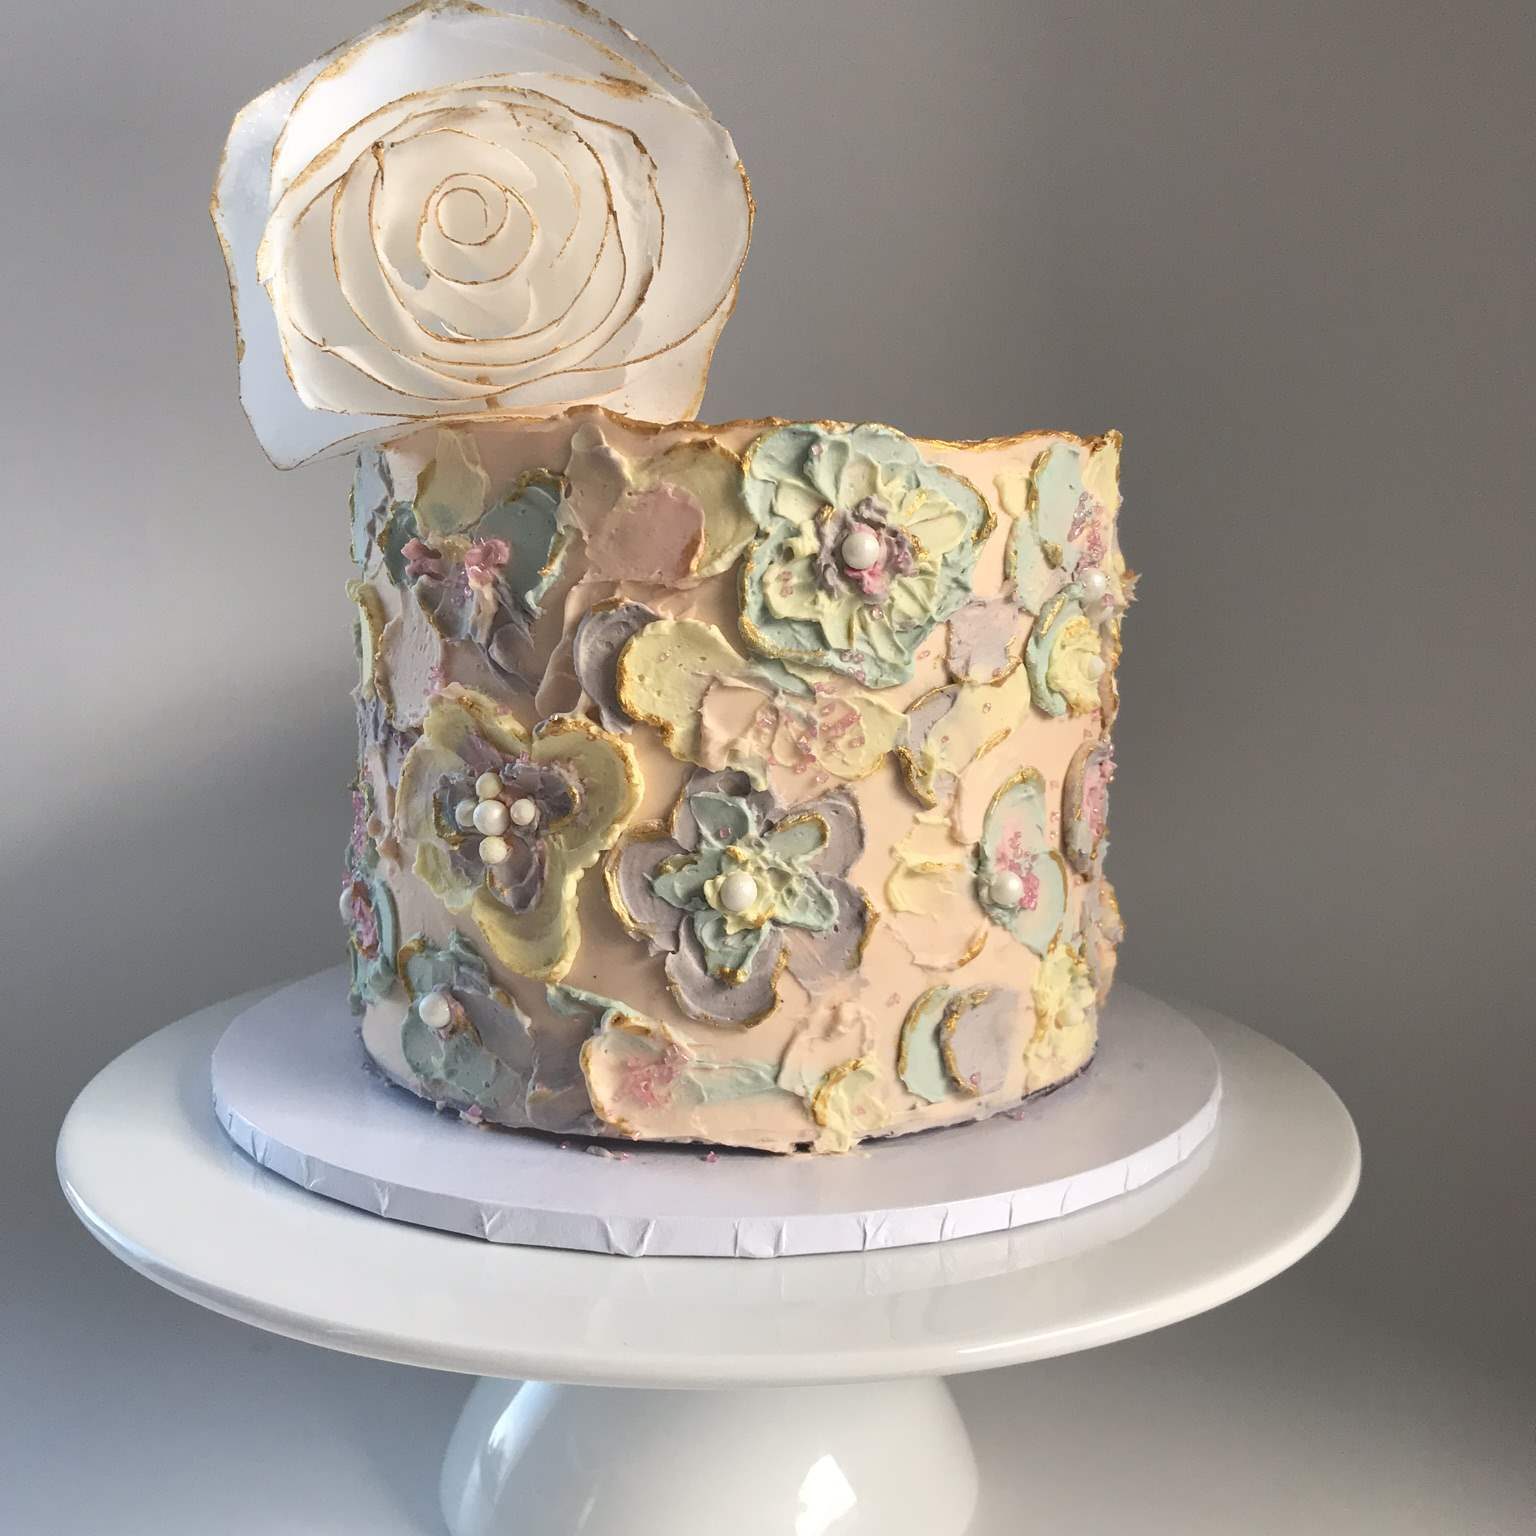 Naomi Wake - Me or the Cake buttercream floral (Price guide - standard height) (2)